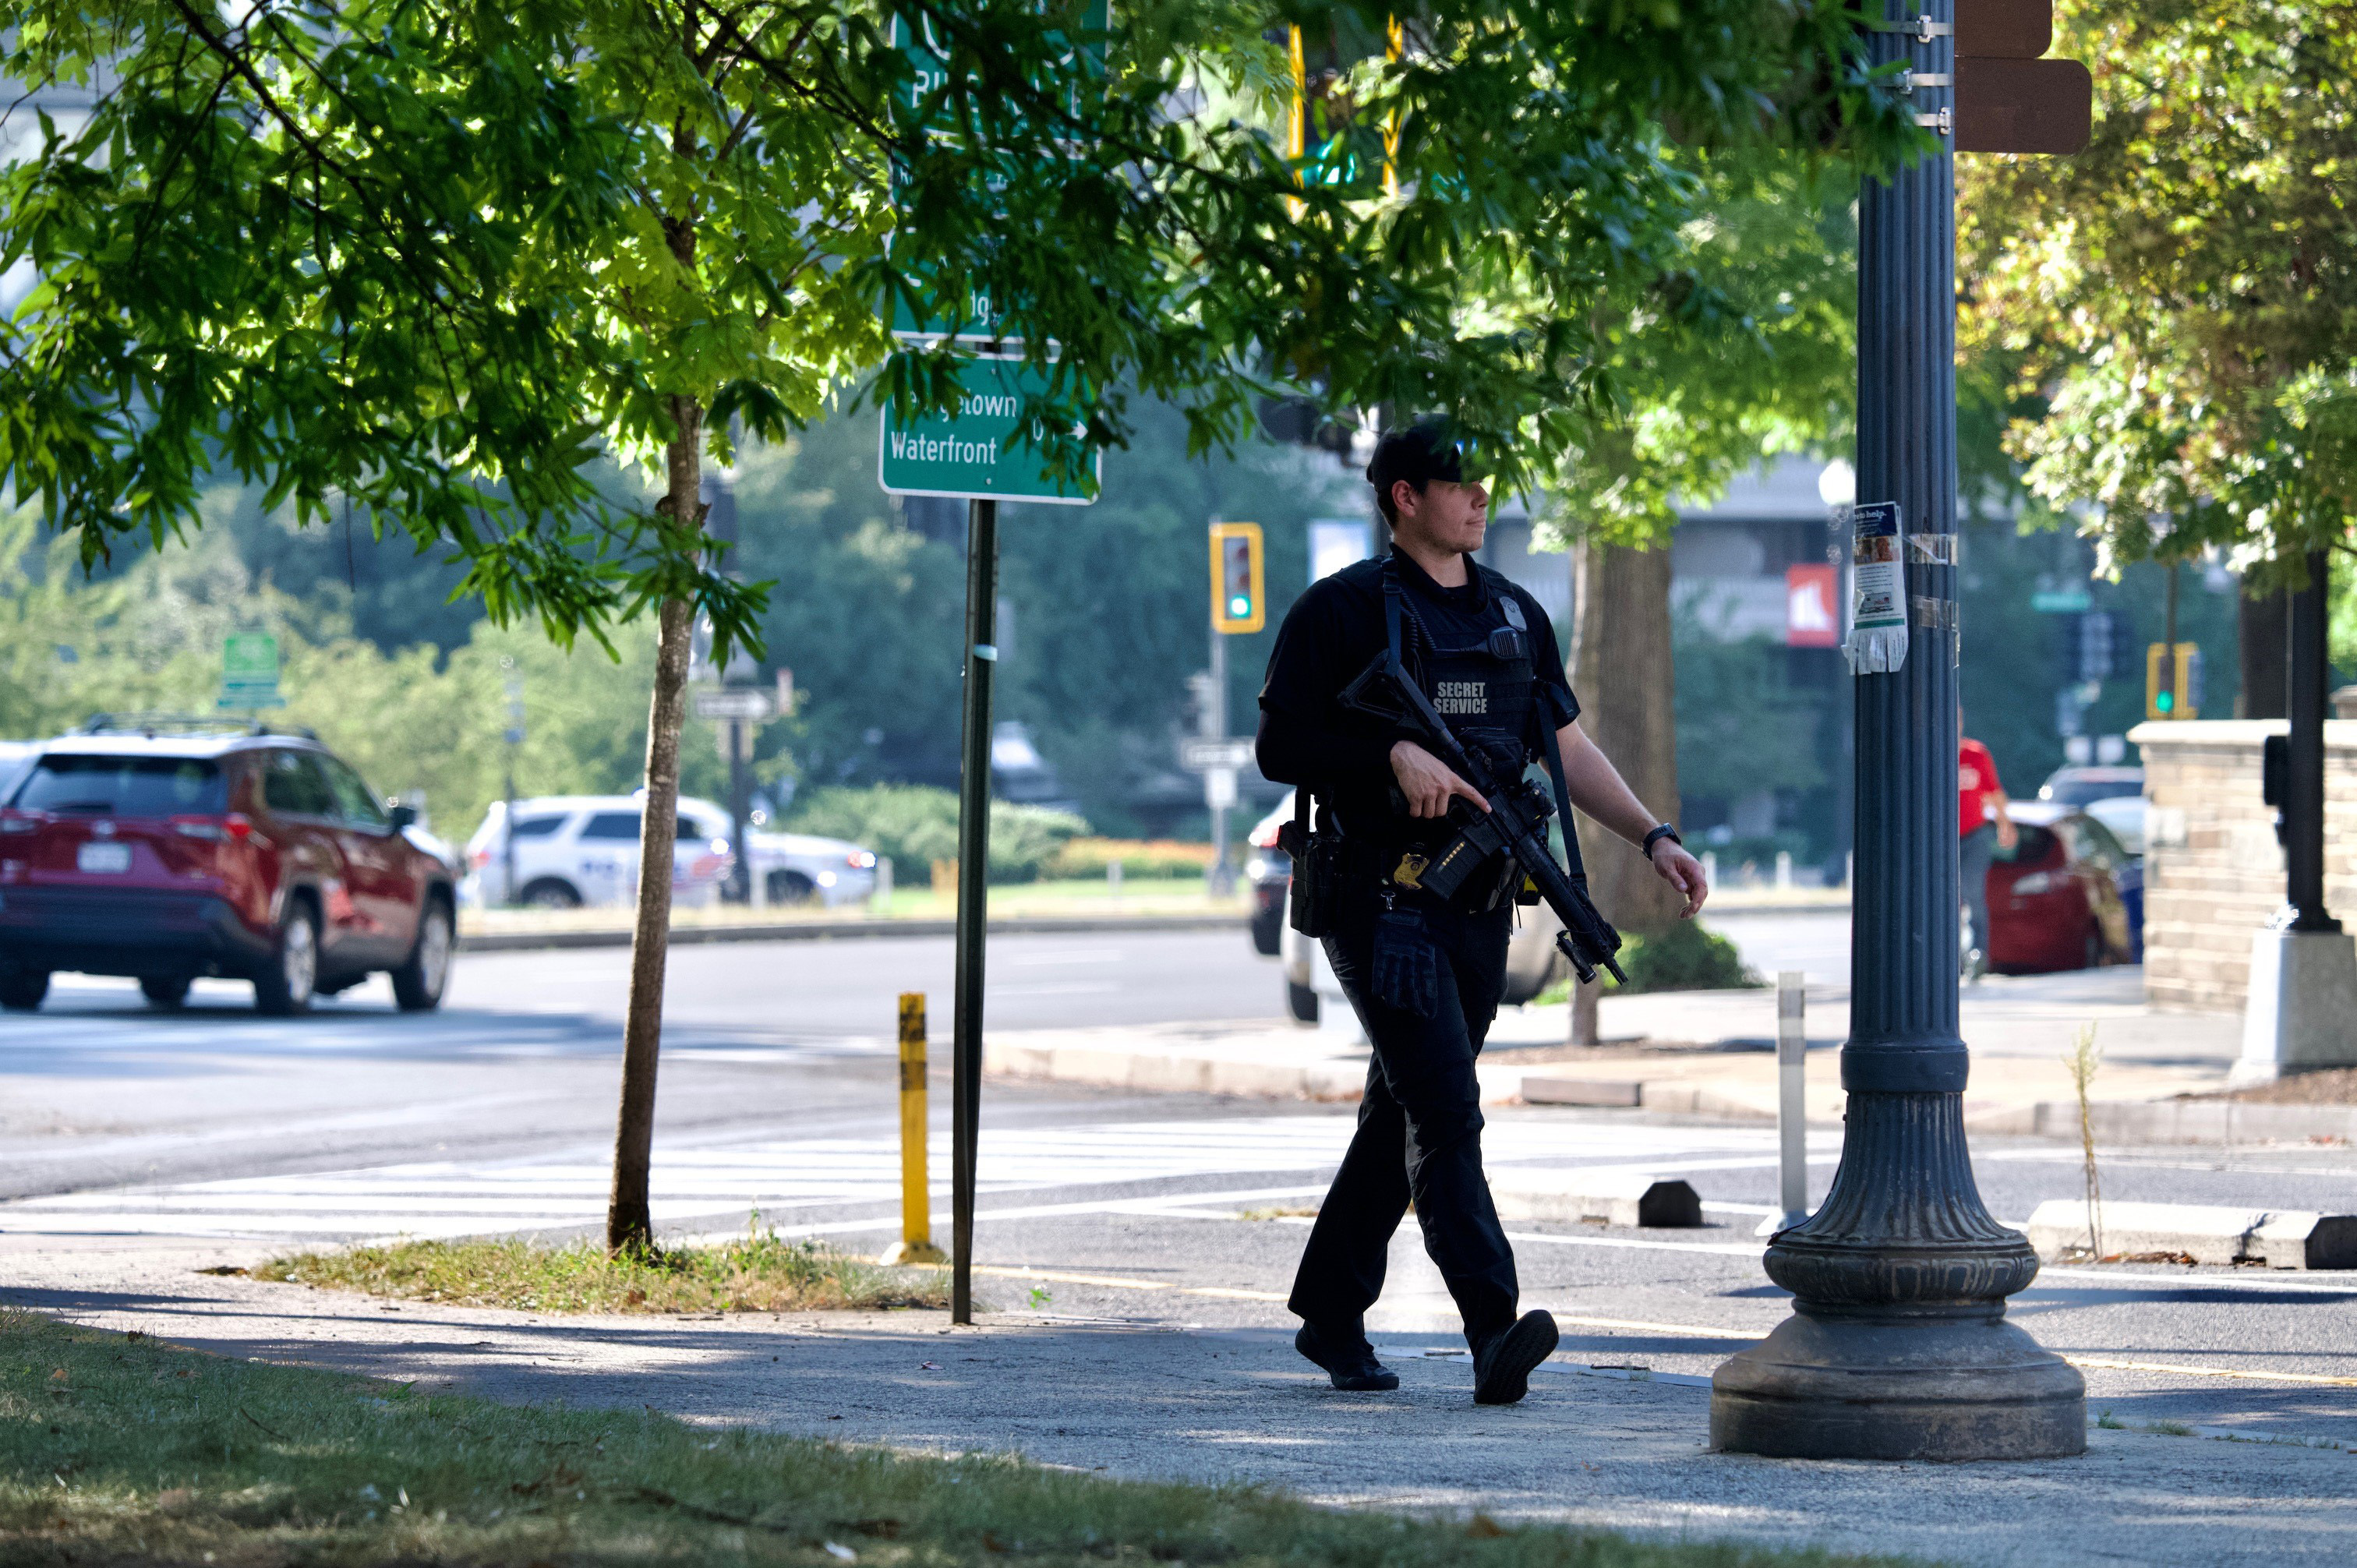 Murder Suspect On The Run In Washington, D.C. After Escaping